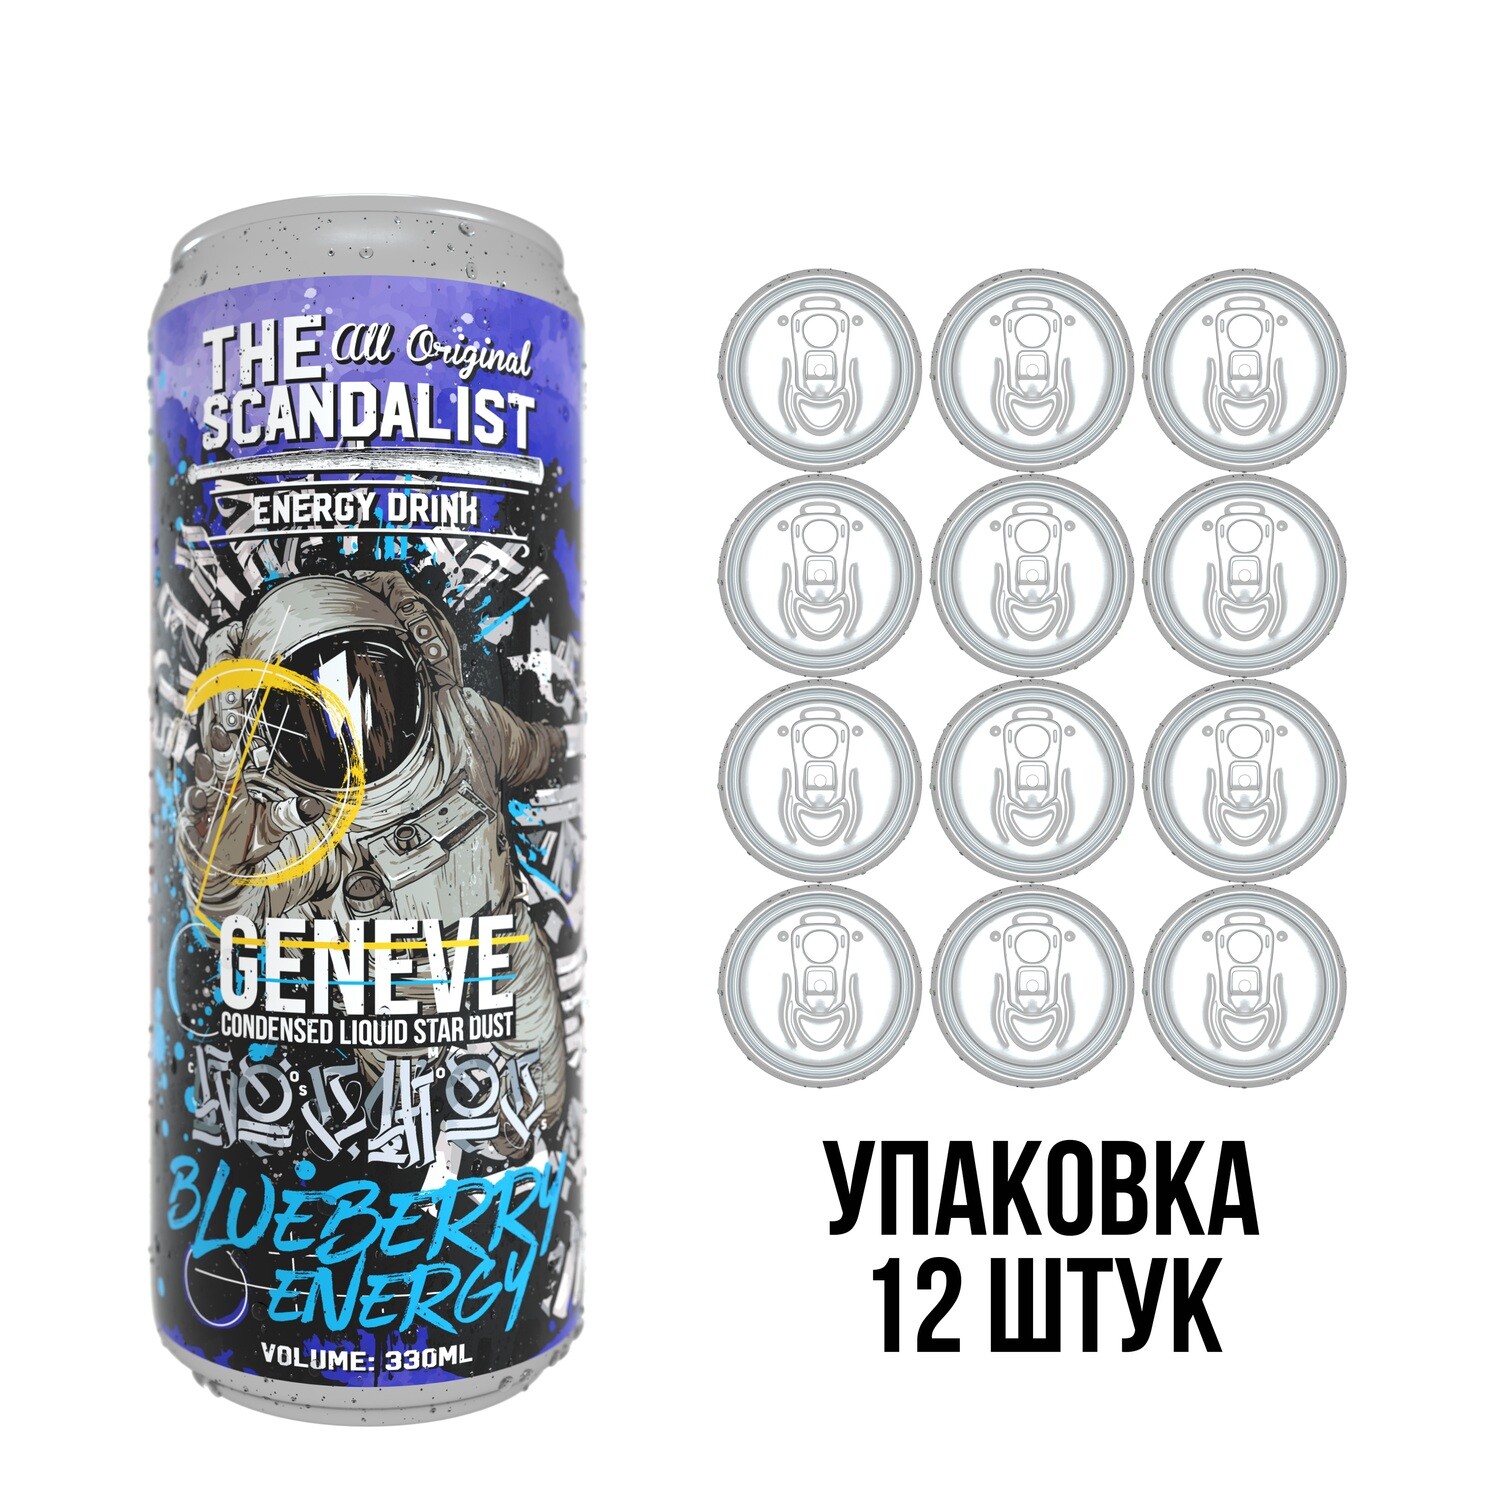 12-Pack * The Scandalist Energy Drink "Geneve"